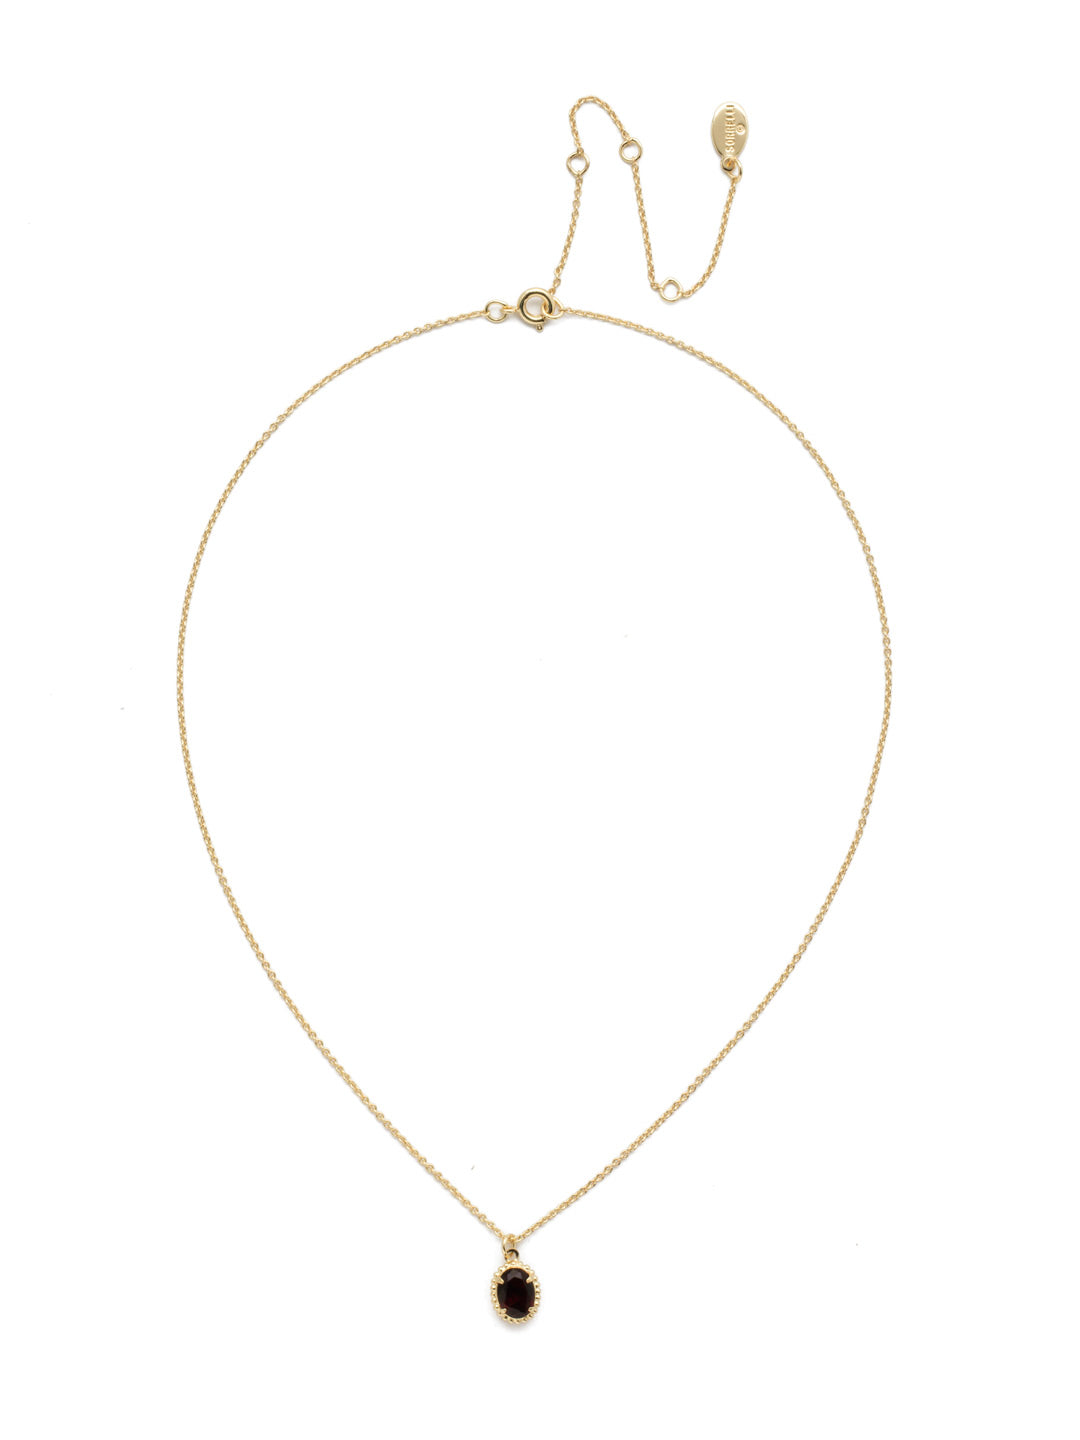 Maisie Pendant Necklace - NEF49BGBUR - This is the perfect day-to-night sparkling tiny pendant necklace that has an adjustable chain to fit your neckline. From Sorrelli's Burgundy collection in our Bright Gold-tone finish.